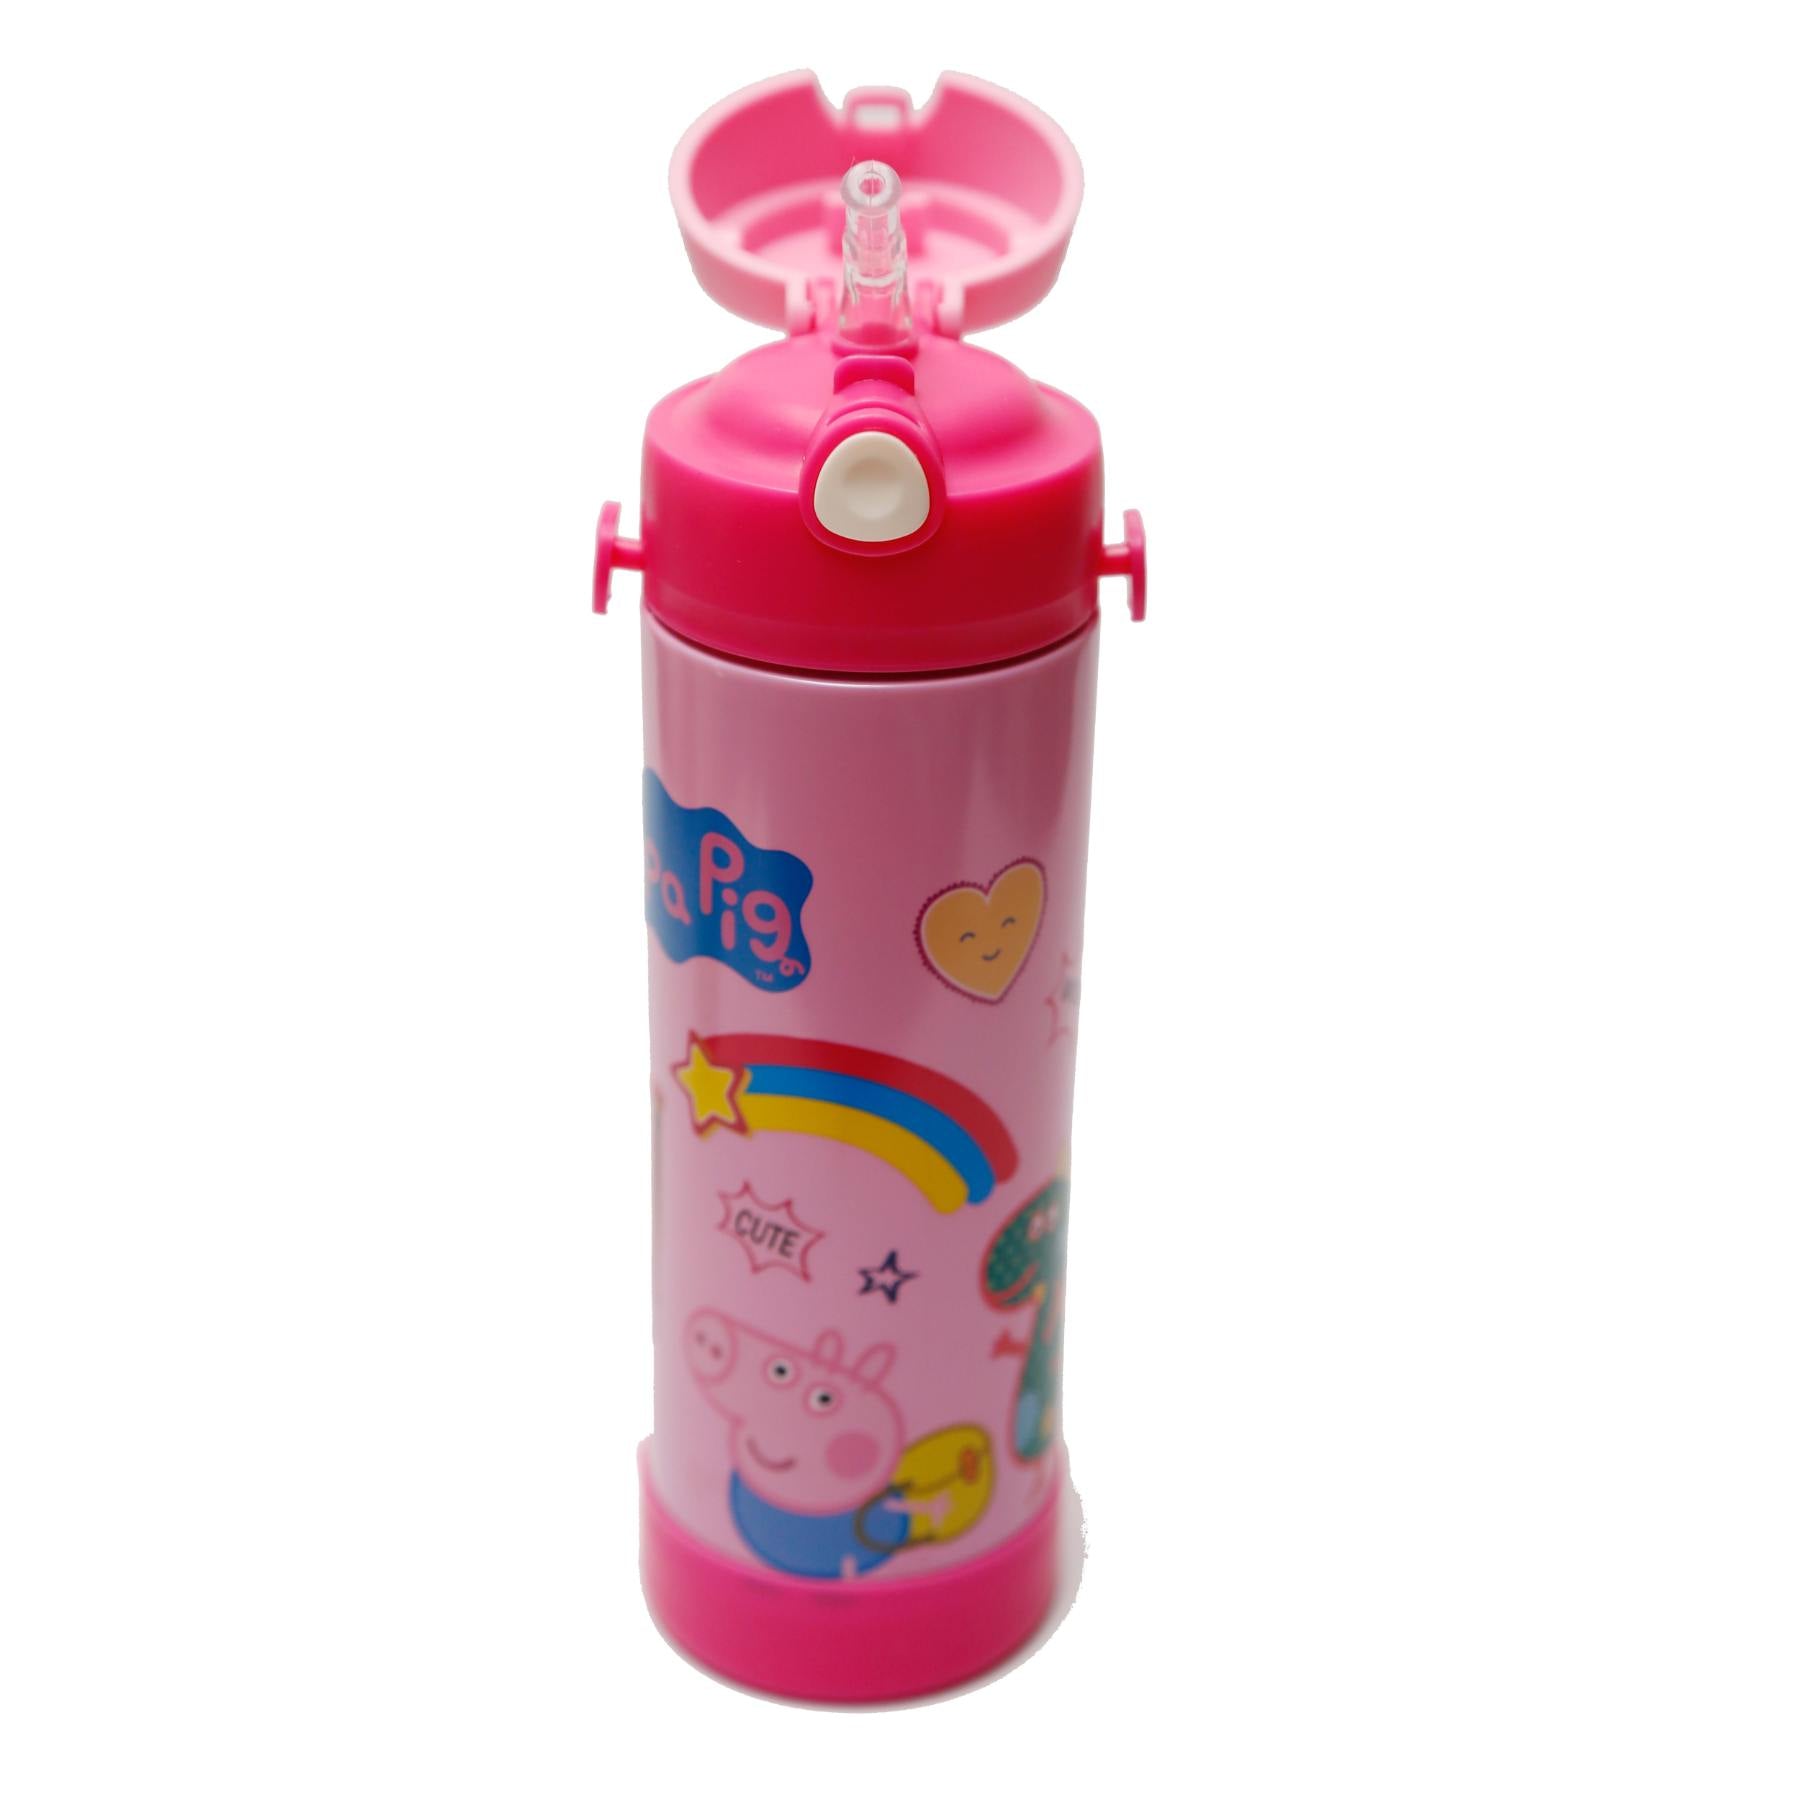 Youp Stainless Steel Insulated Pink Color Peppa Pig Kids Sipper Bottle Lucas - 500 Ml